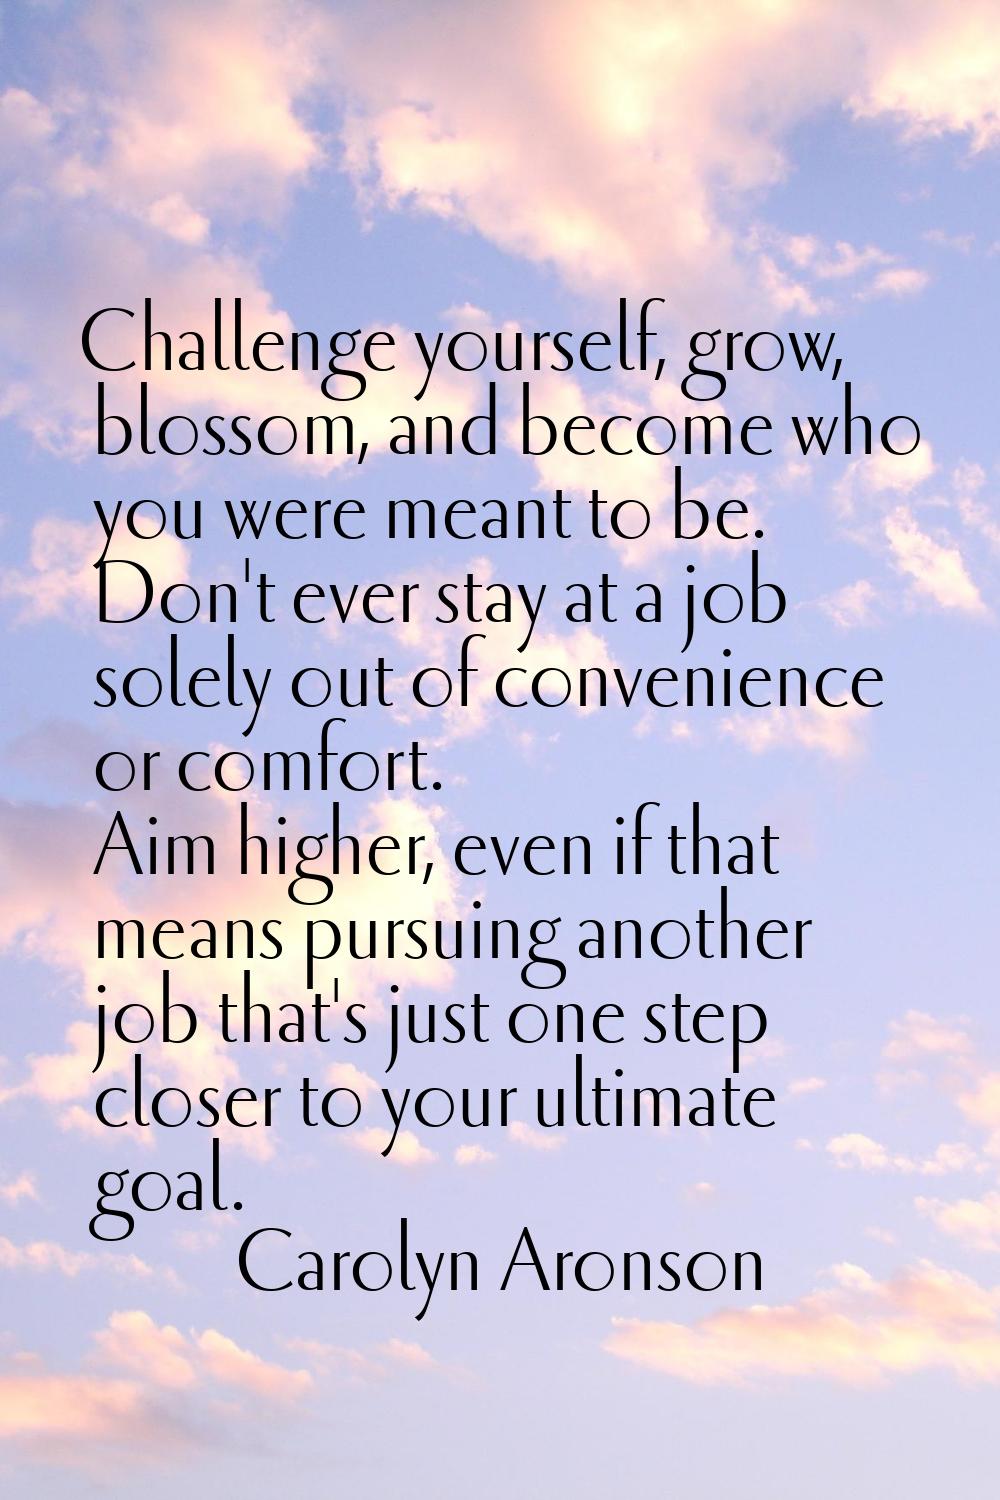 Challenge yourself, grow, blossom, and become who you were meant to be. Don't ever stay at a job so